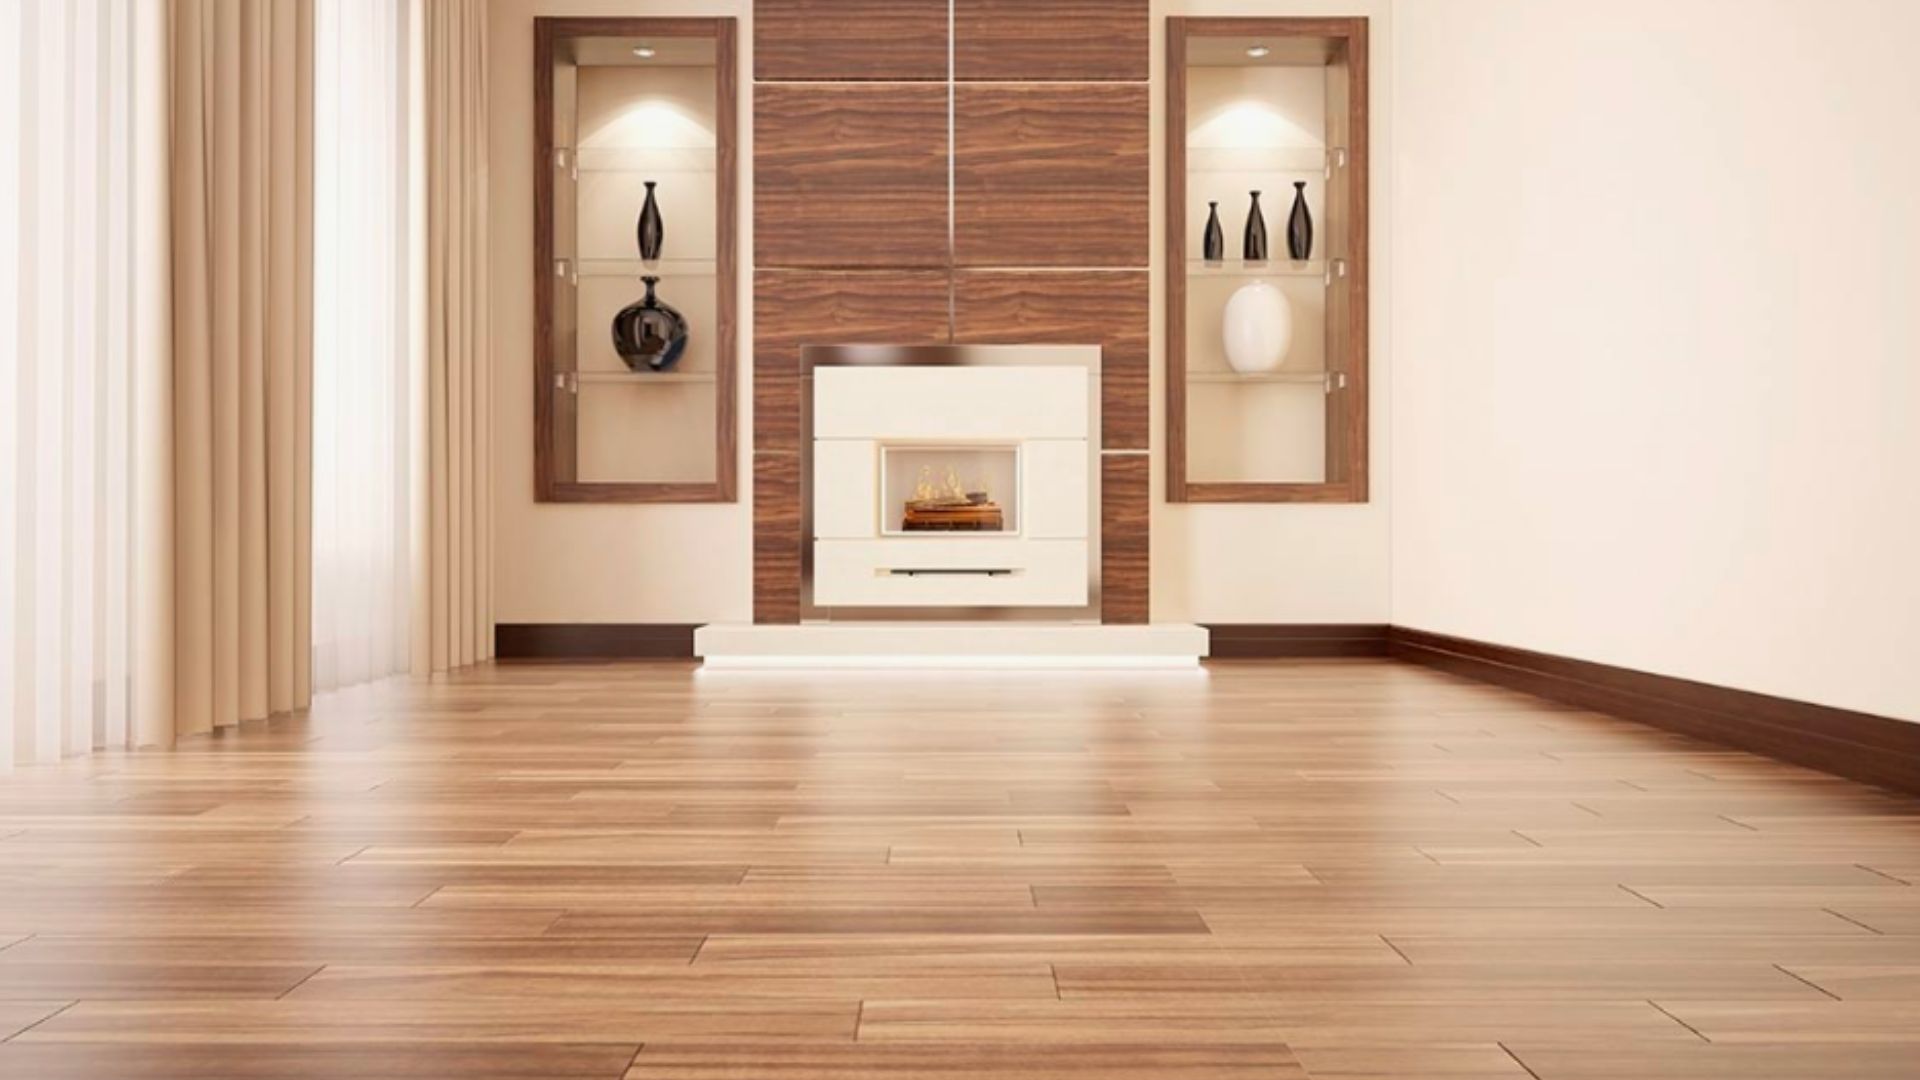 What Are the Benefits of Choosing Wooden Flooring